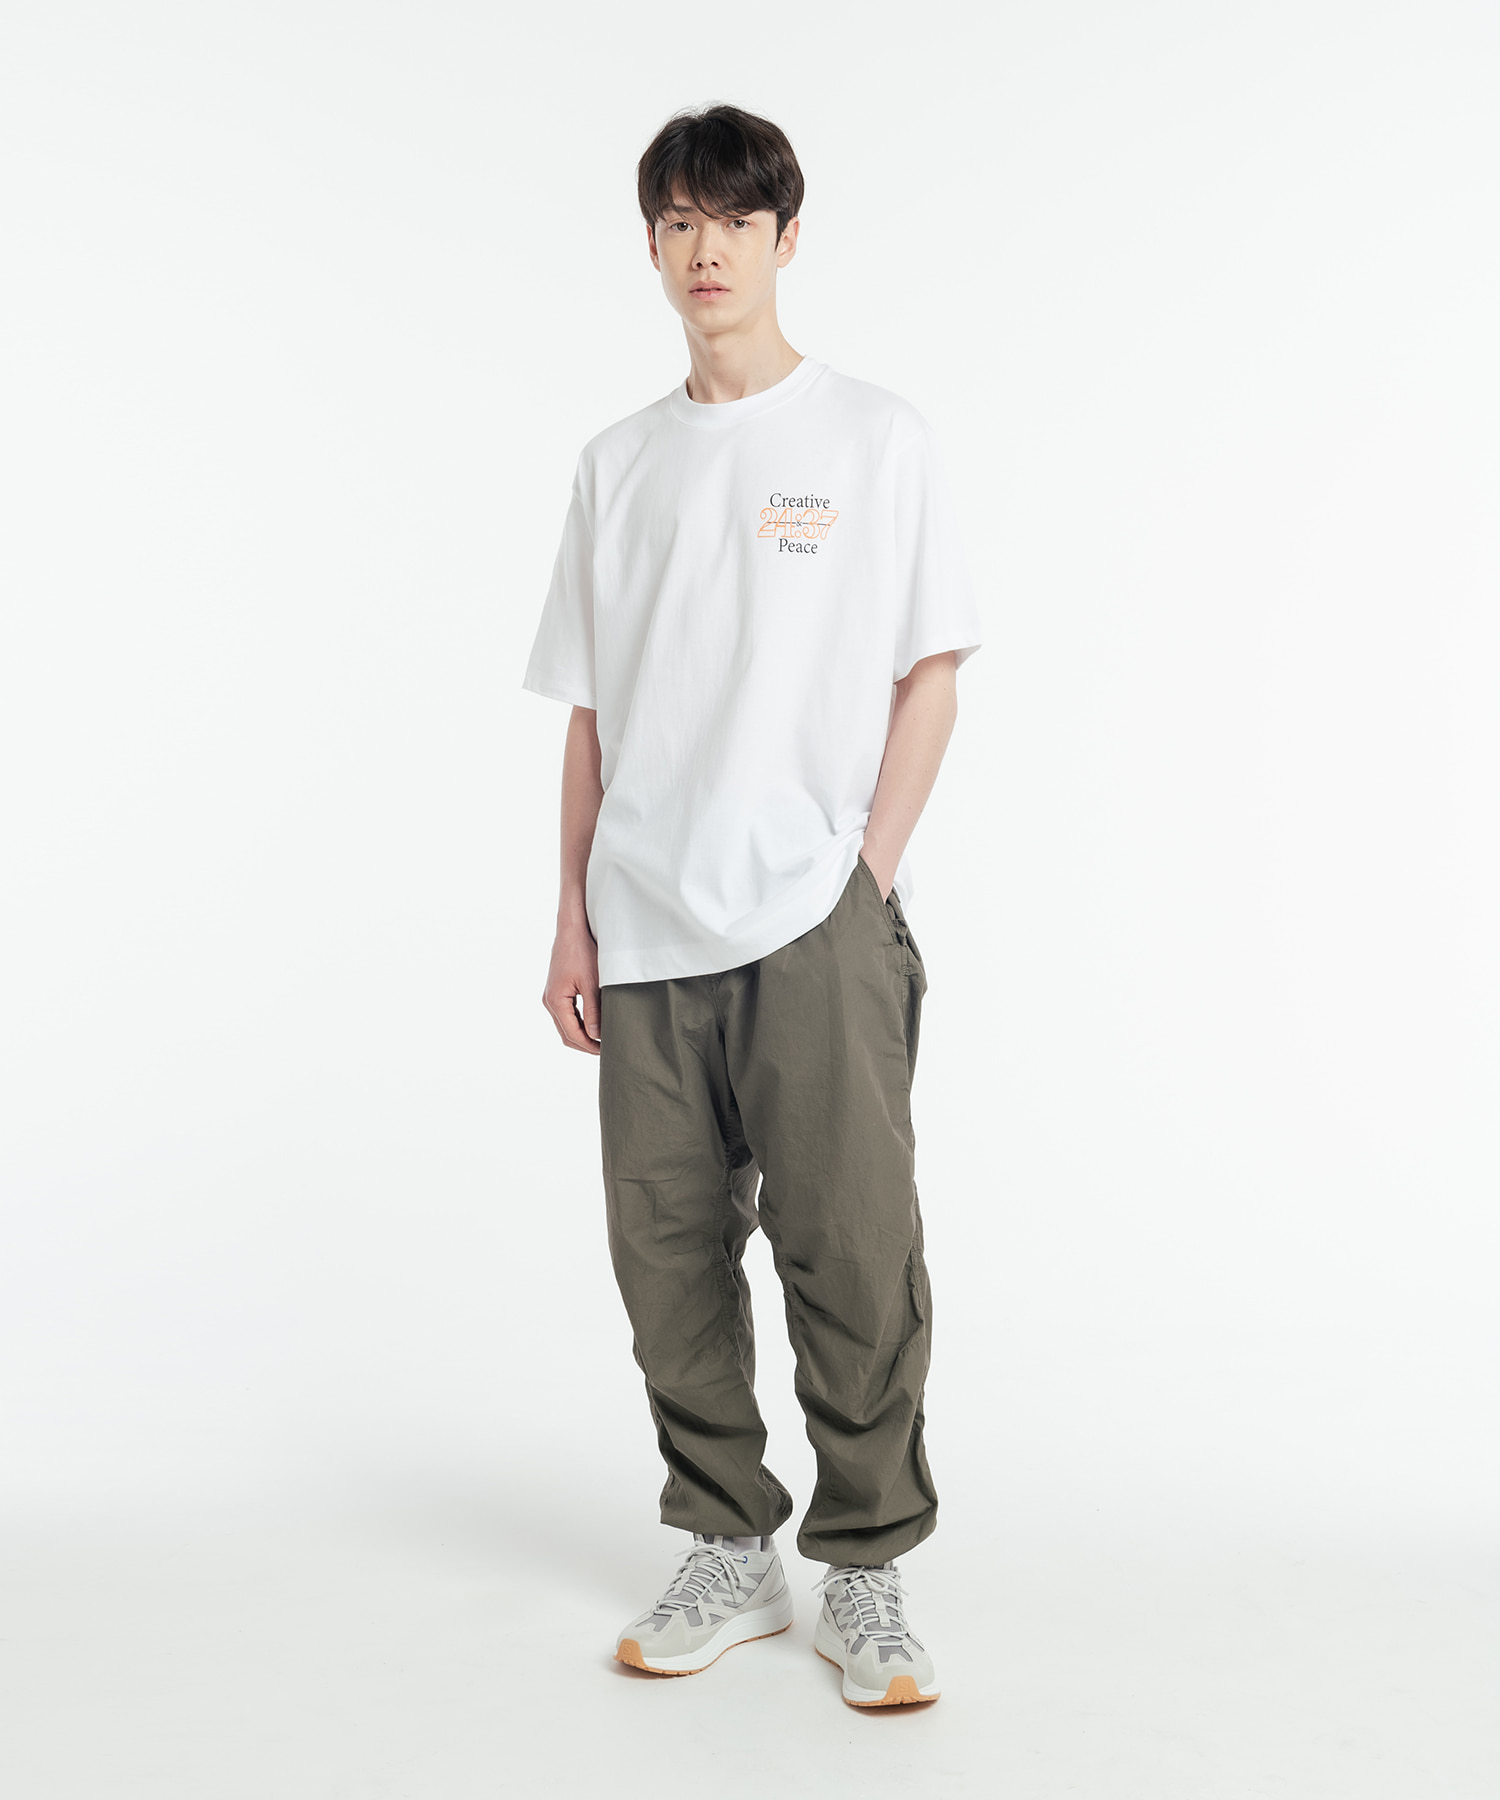 MADMARS 2022 S/S 2st COLLECTION